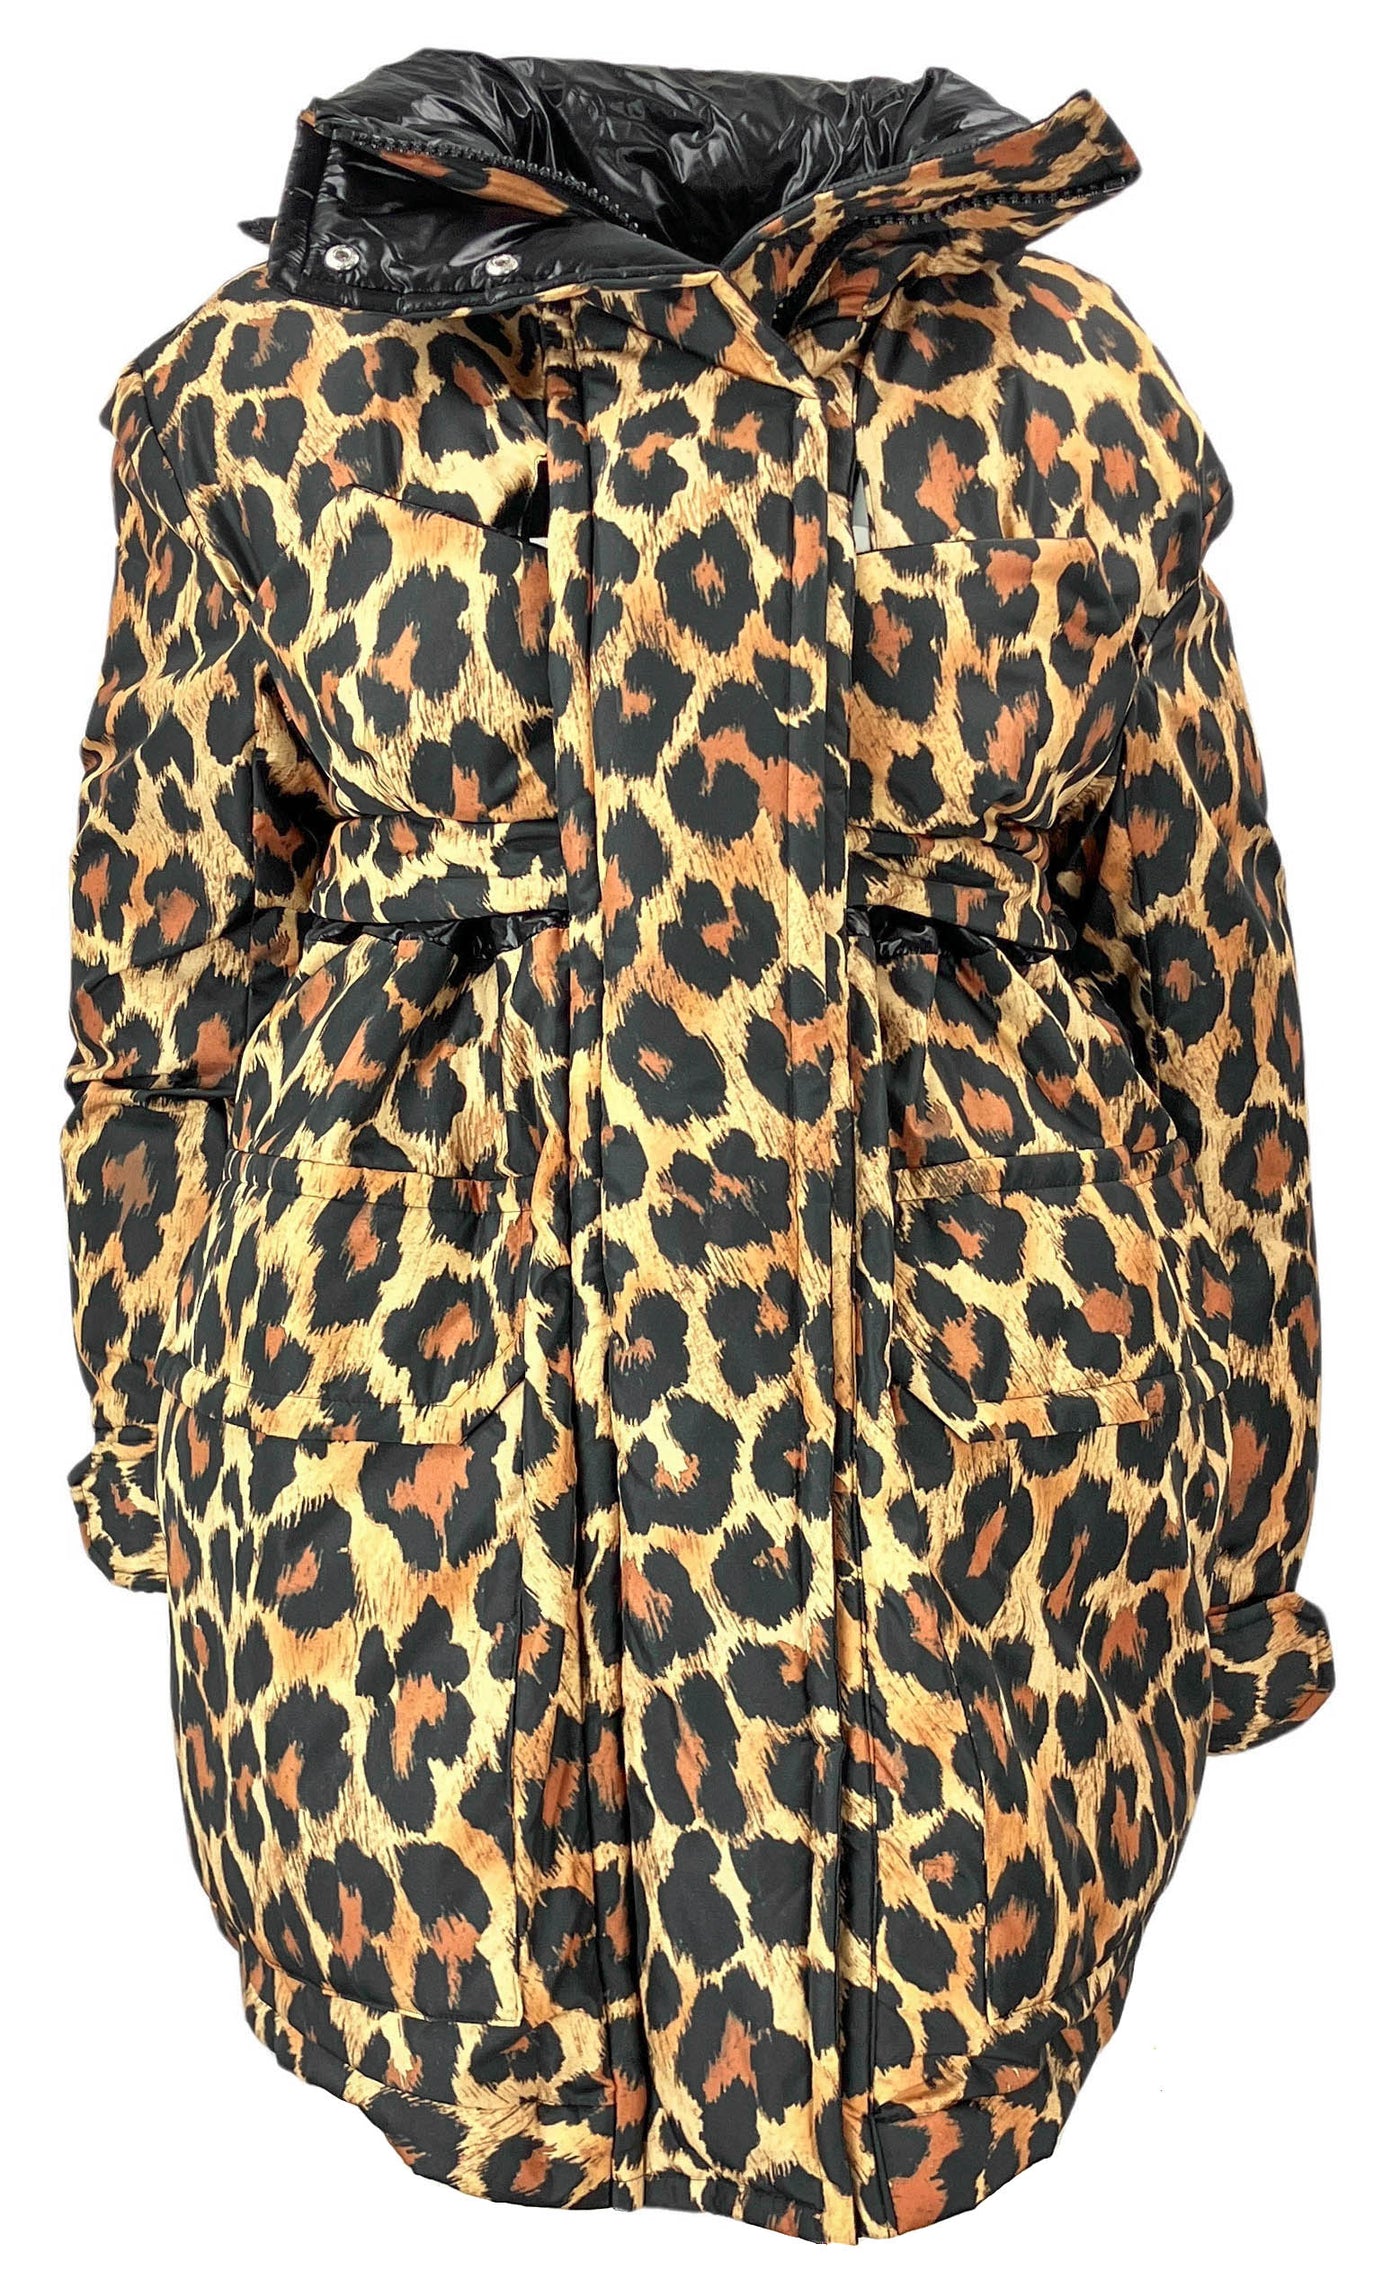 sacai Leopard Print Hooded Puffer Jacket in Brown - Discounts on sacai at UAL